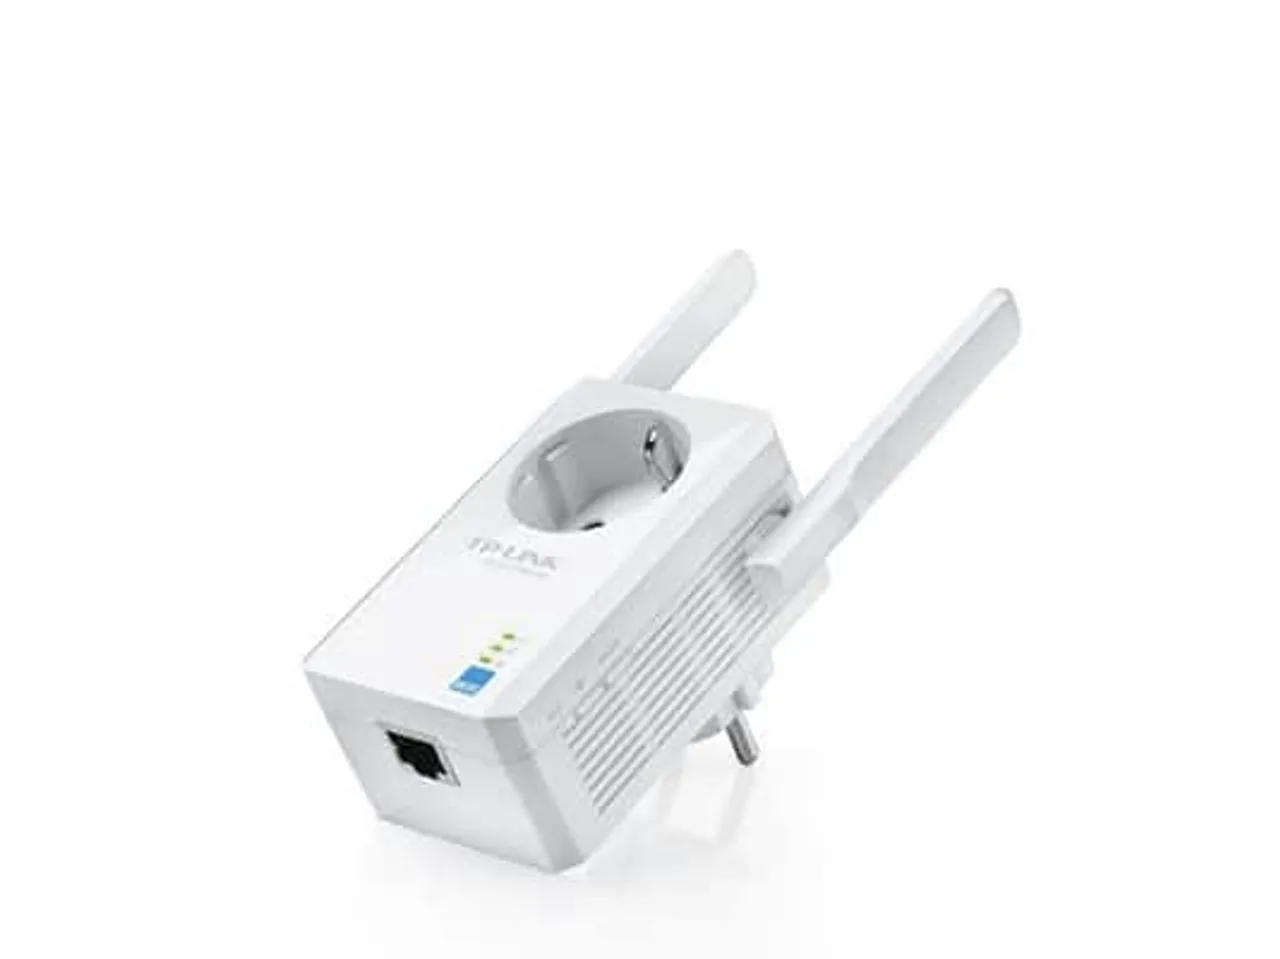 TP-Link TL-WA860RE Wi-Fi Extender Review